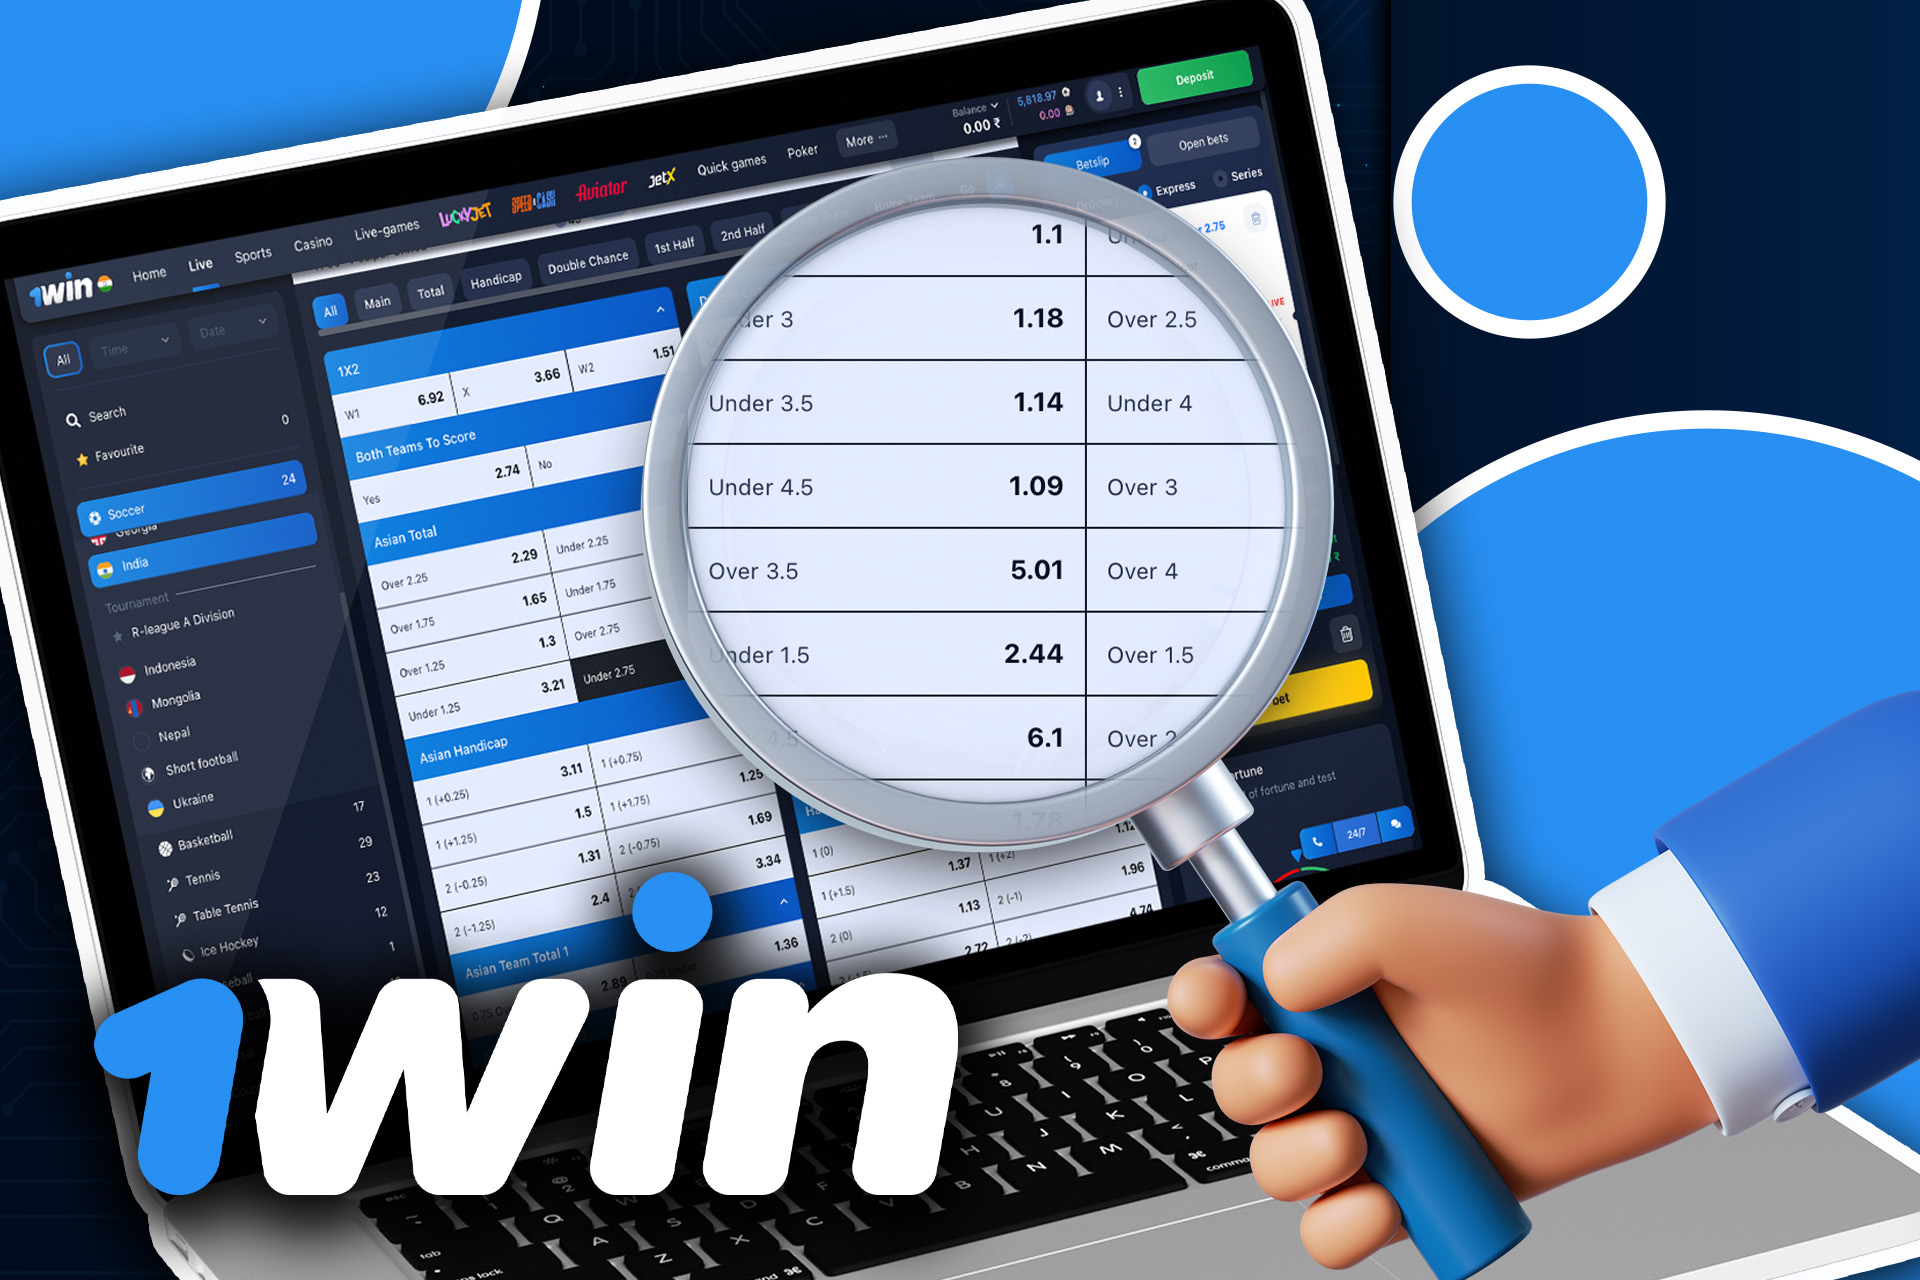 1win offers profitable odds on various sports, cybersports, and virtual sports.